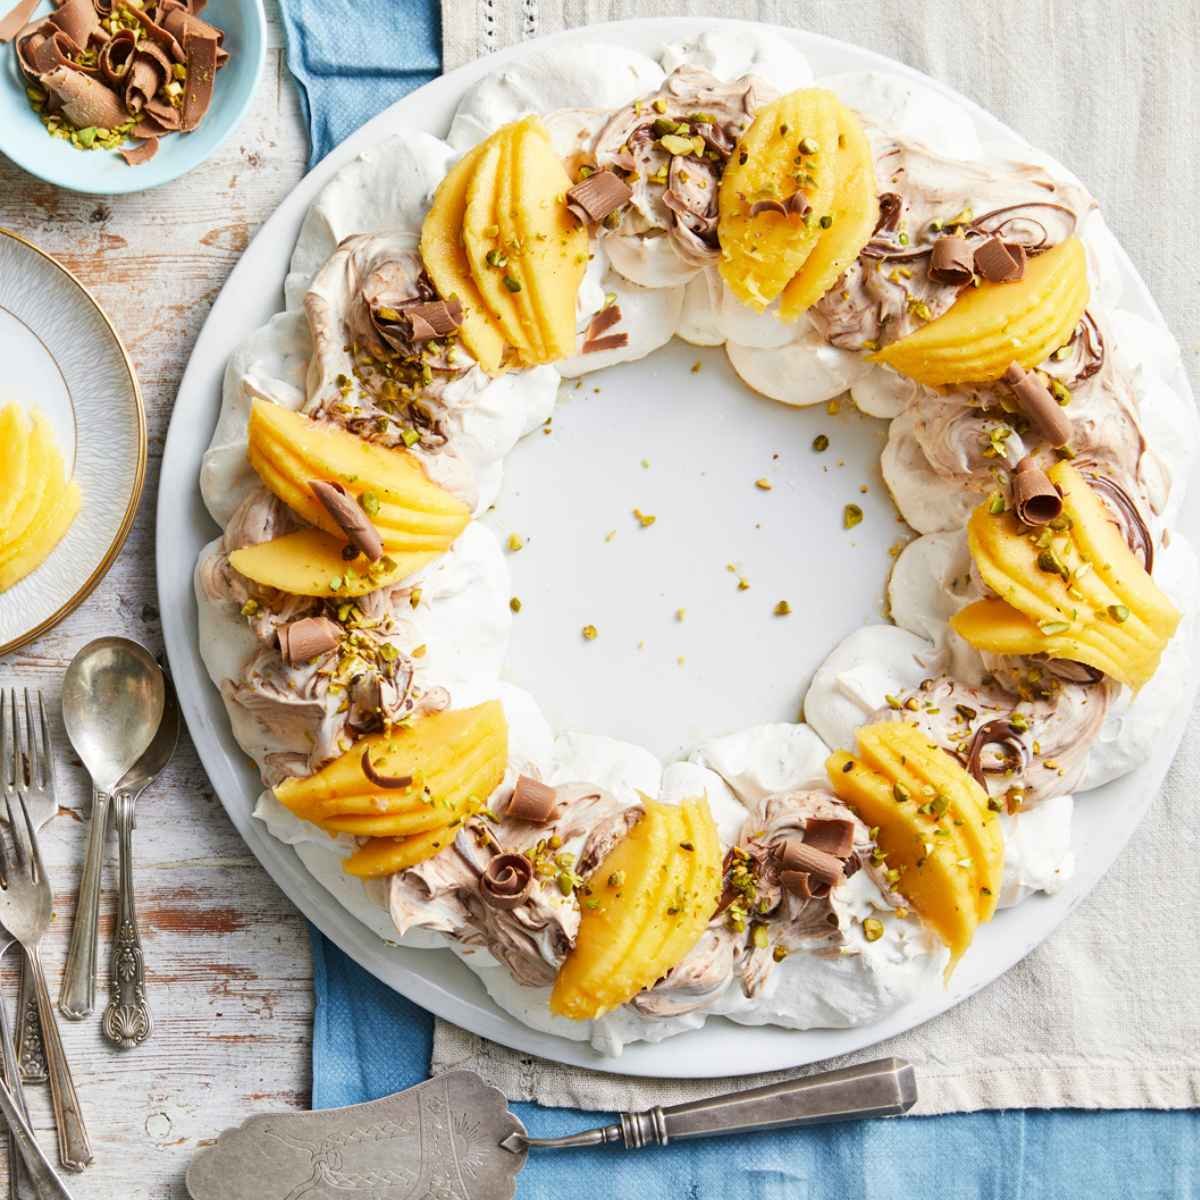 A holiday wreath on a plate with pavlova, topped with hazlenut cream and Calypso mangoes, drizzled with pistachios.